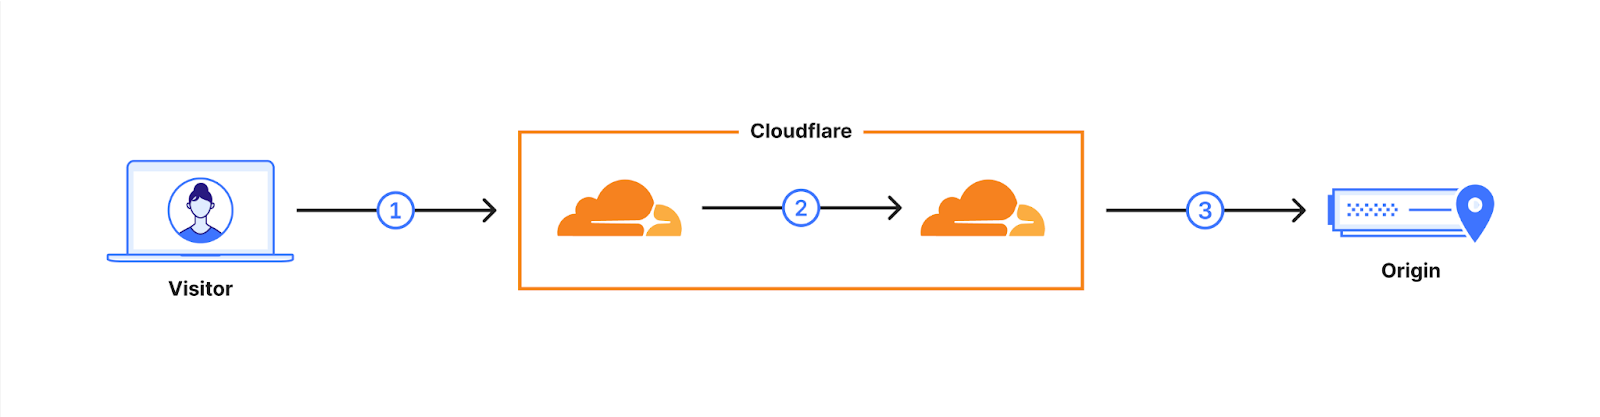 Cloudflare now uses post-quantum cryptography to talk to your origin server